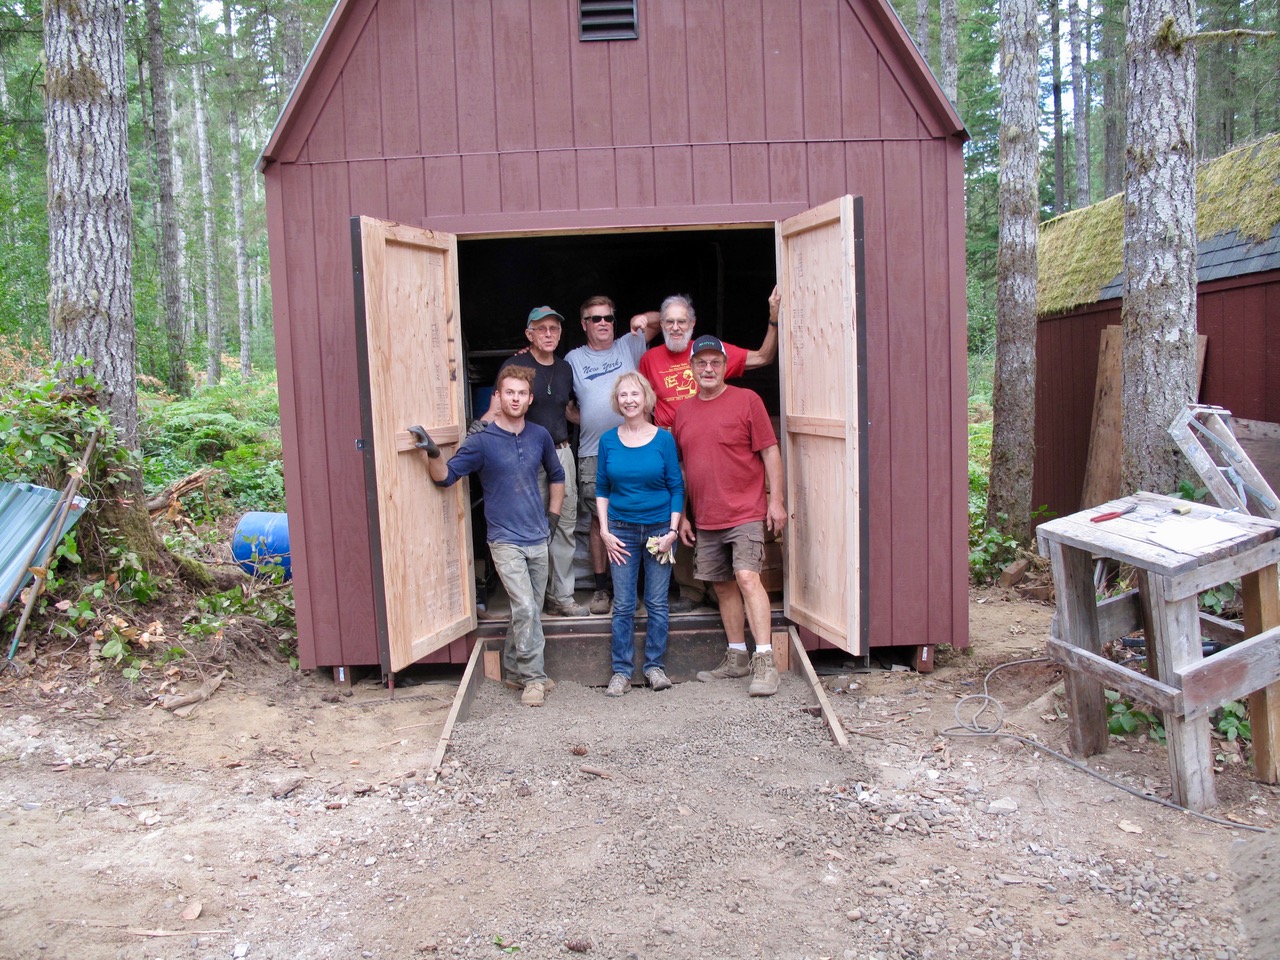 The final day, September 12, 2017. The shed is partly loaded, time for a quick photo. Next we will load in the steel tables, and remaining tents and tables. Thanks to Sharon Feeney, Ed Salerno, Steve Sandry, Leon White, Kirk Mclean, and the Boss, Gene Carlson.